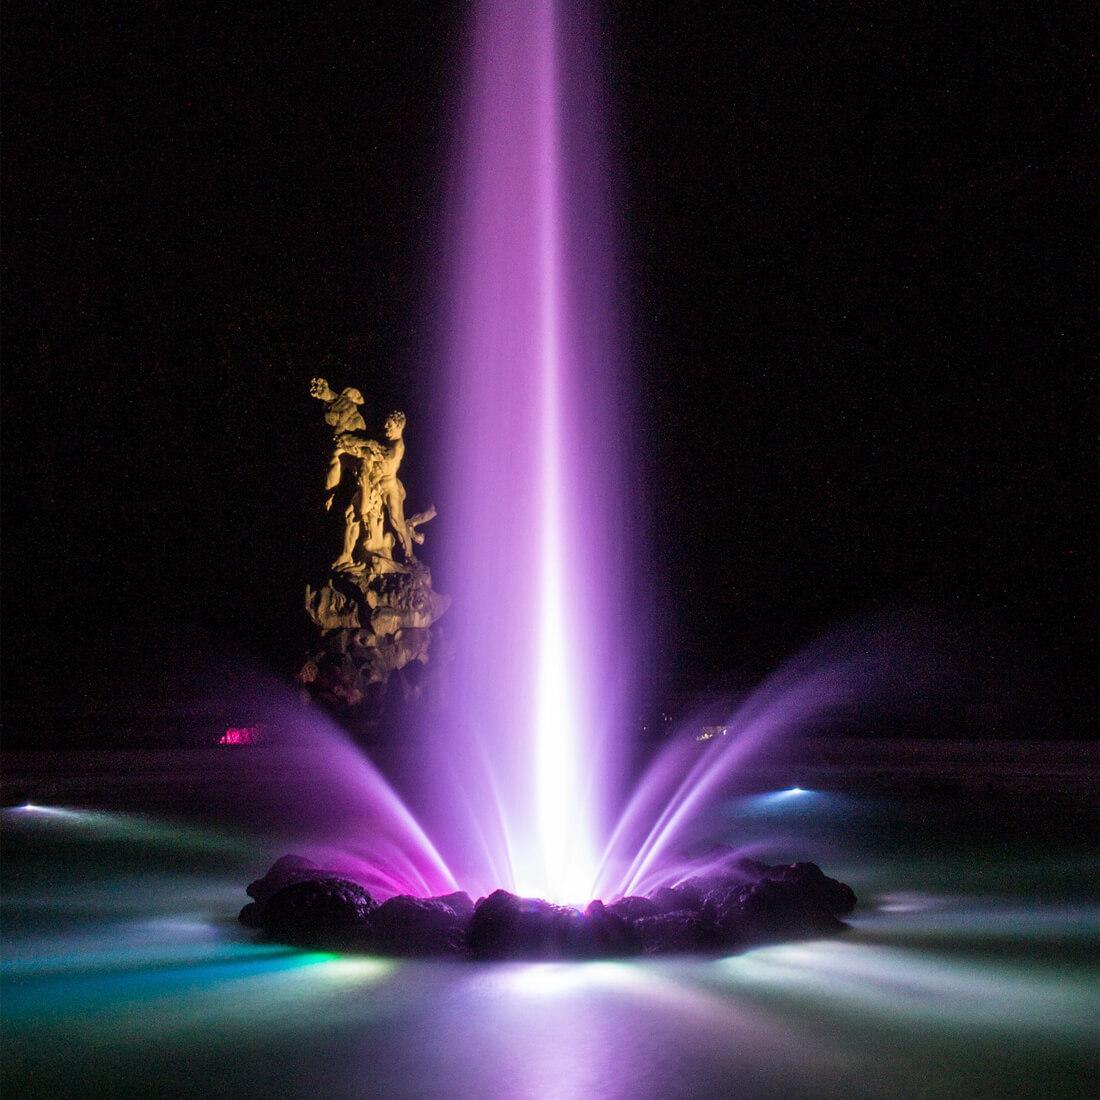 Fountain Live Wallpaper for Android